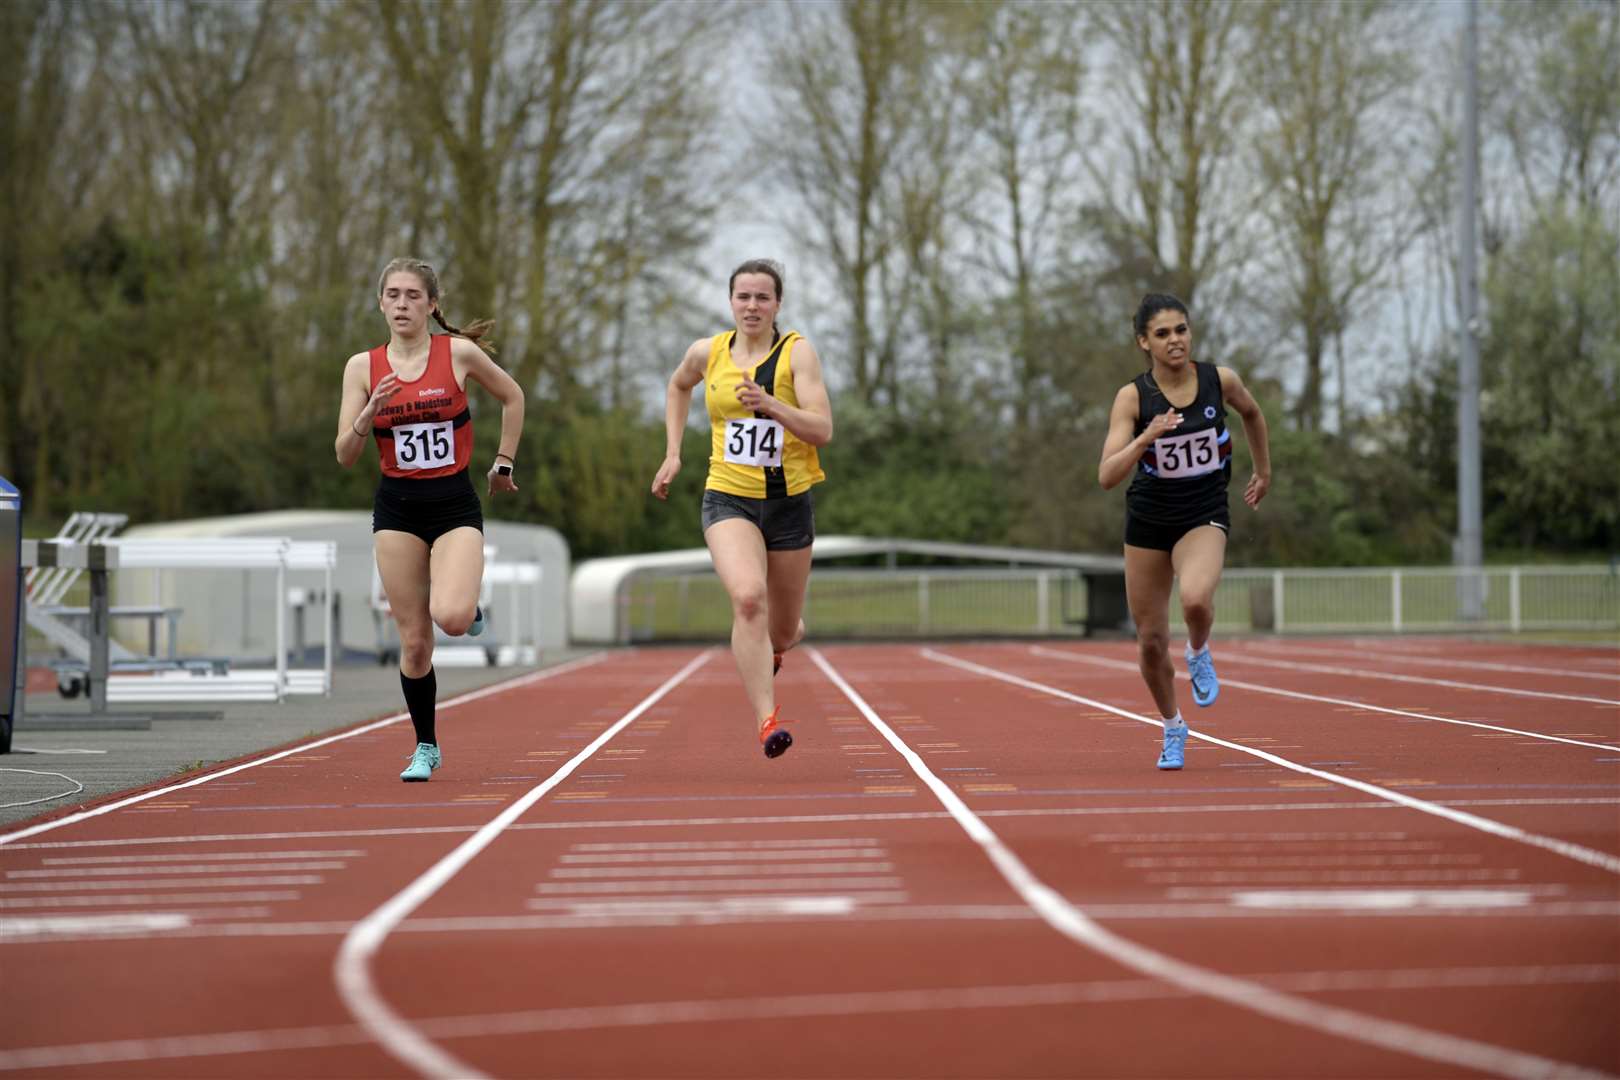 Charlotte de la Porte-Godden (Medway and Maidstone AC), Imogen Davis (Ashford AC) and Chanelle Cole (Blackheath & Bromley Harriers) in 200m sprint action Picture: Barry Goodwin